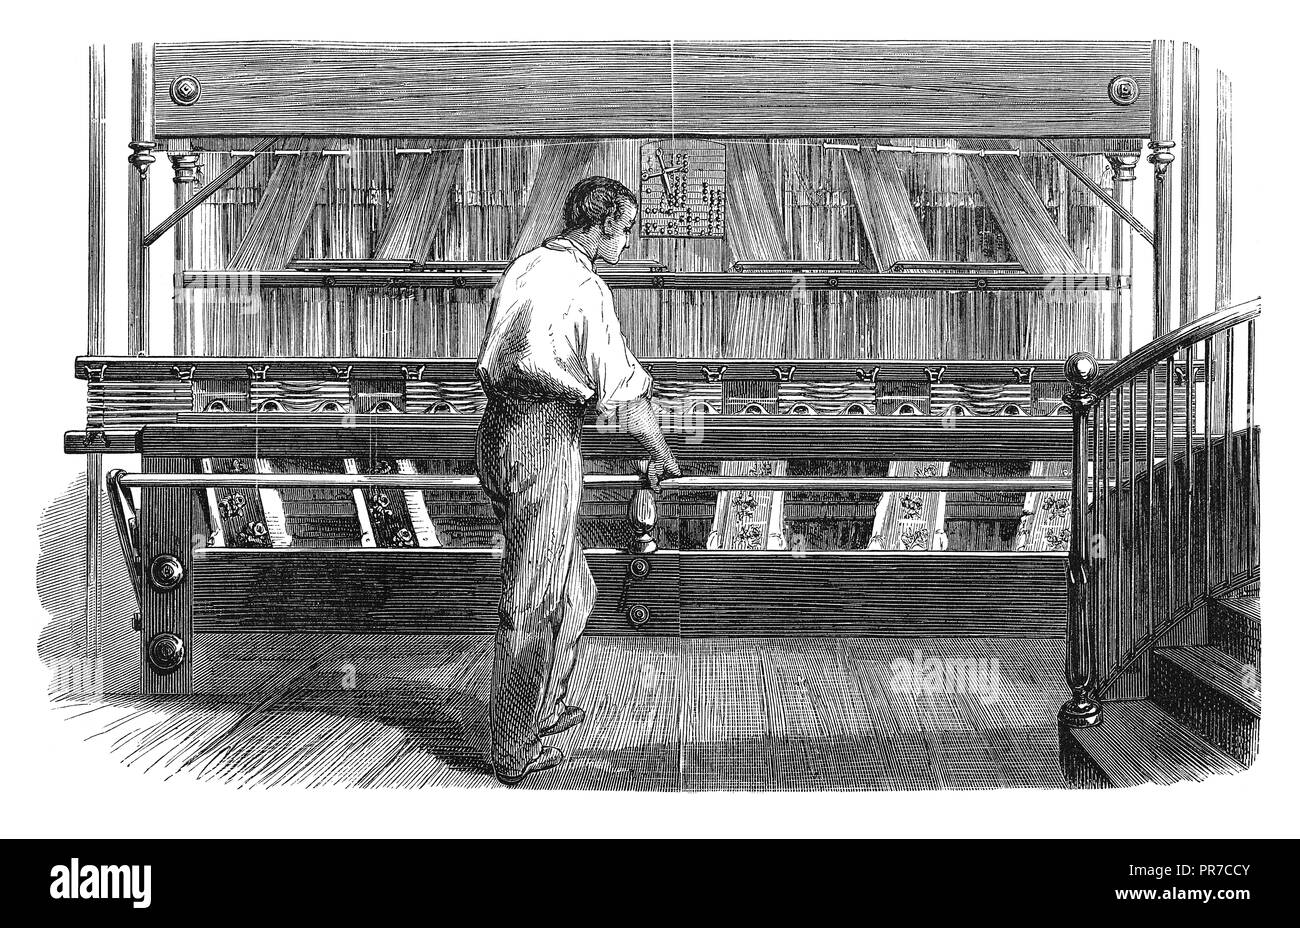 19th century illustration of loom for weaving figured ribbons. Published in 'The Practical Magazine, an Illustrated Cyclopedia of Industrial News, Inv Stock Photo